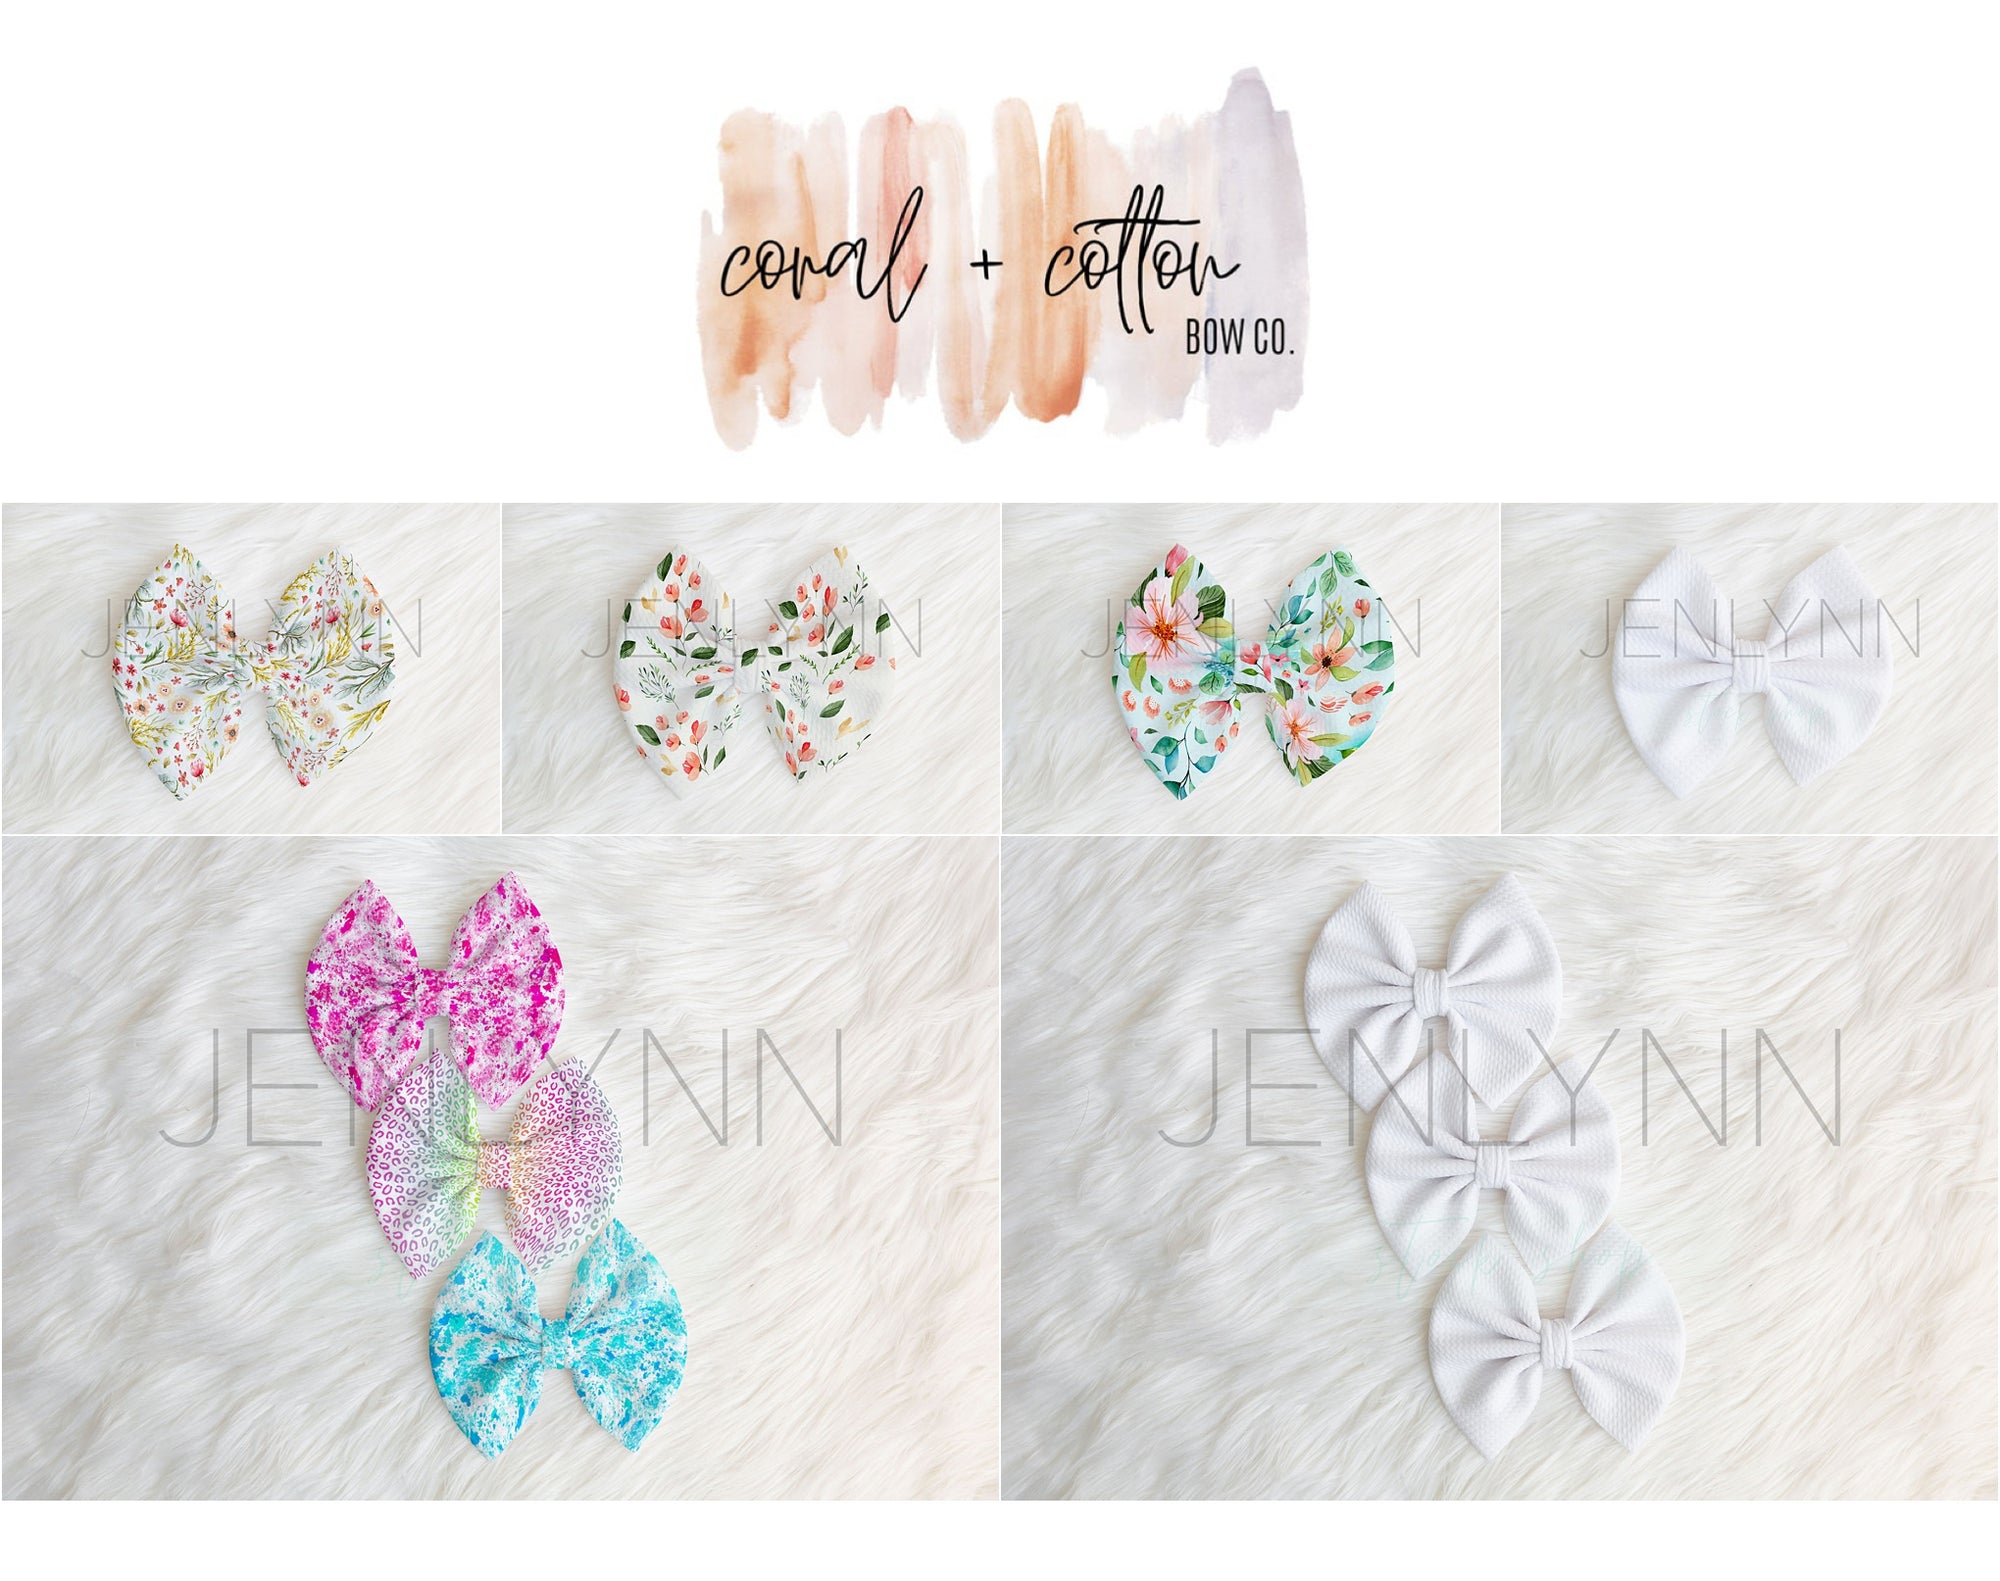 Custom Product Photo Shoot with Coral + Cotton Bow Co.